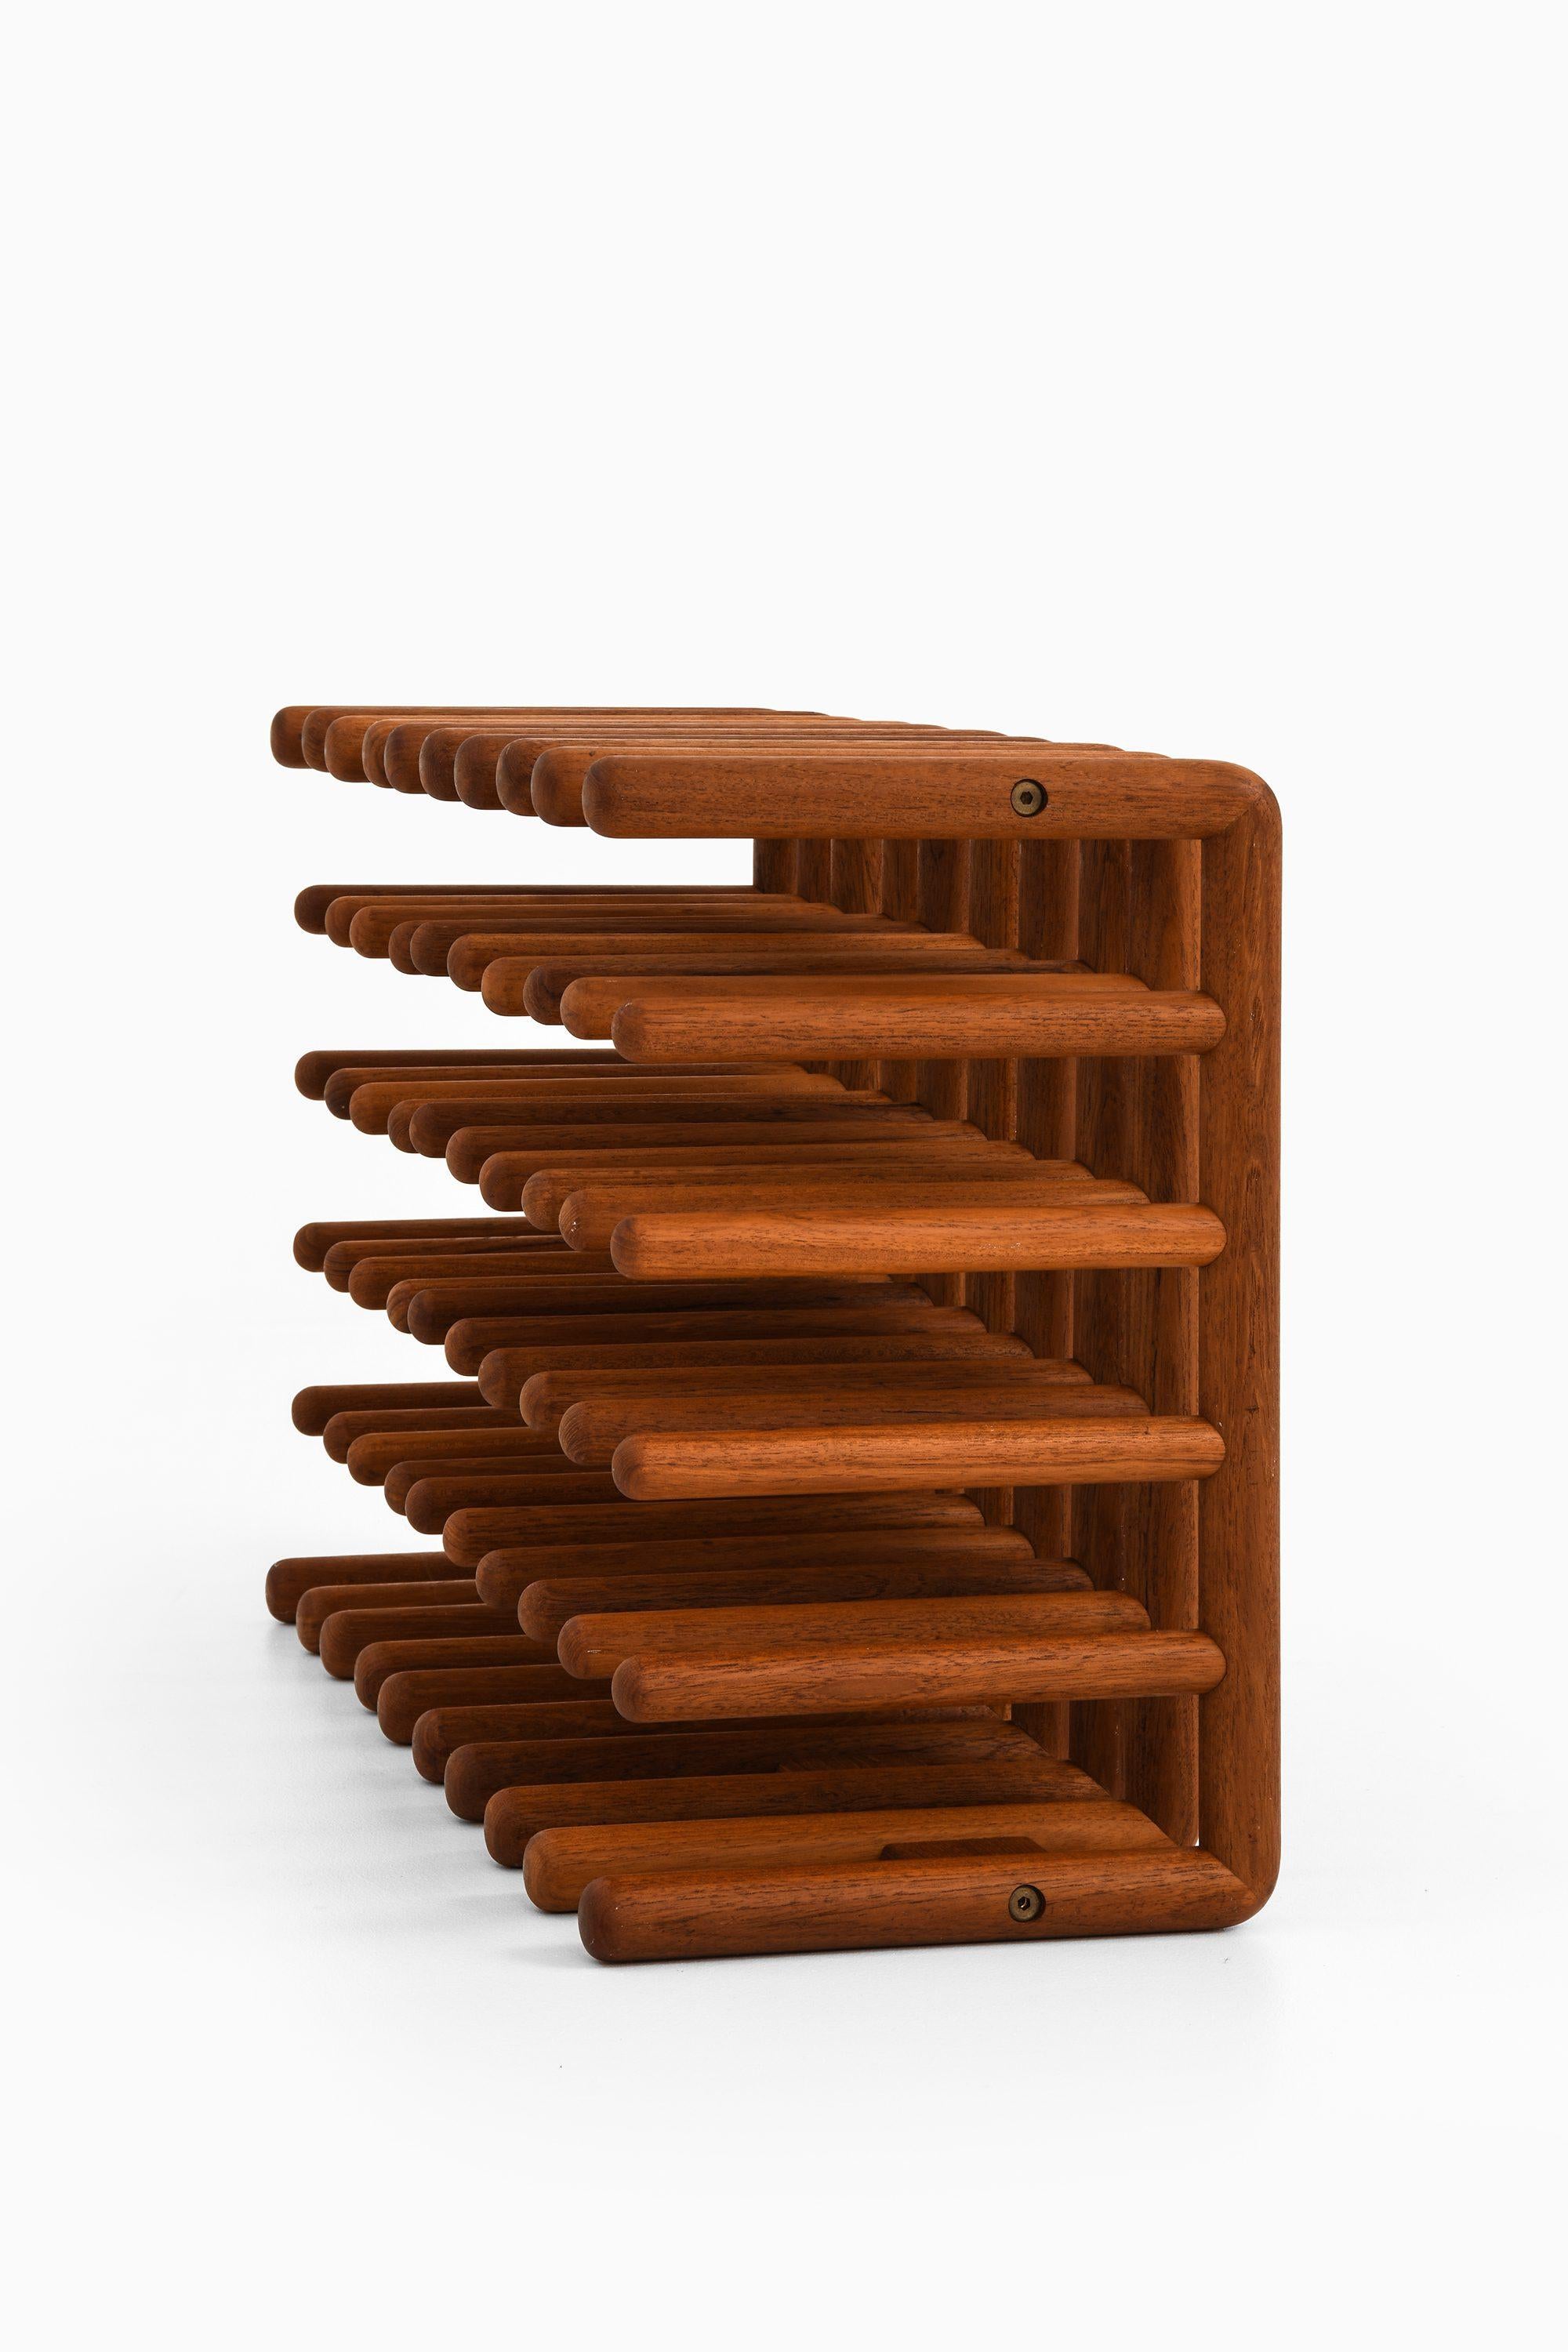 Set of 5 Wine Racks / Bottle Stands in Teak, 1950's

Additional Information:
Material: Teak
Style: Mid century, Scandinavian
Produced in Denmark
Dimensions each (W x D x H): 12.5 x 30 x 49.5 cm
Condition: Good vintage condition, with minor signs of